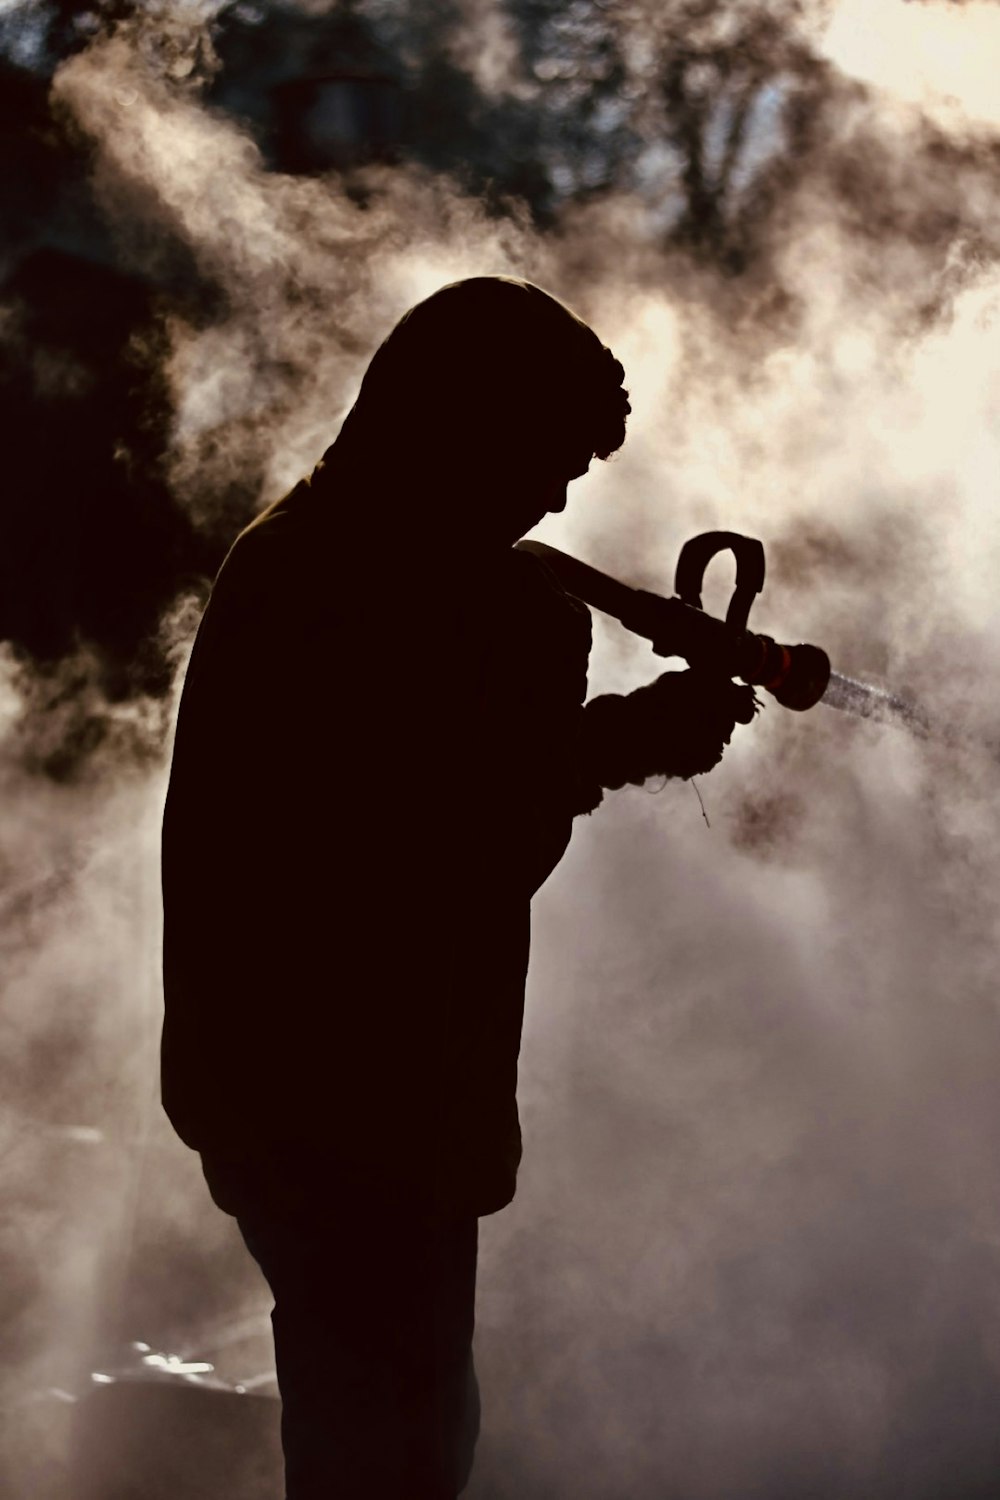 a silhouette of a man holding a water hose